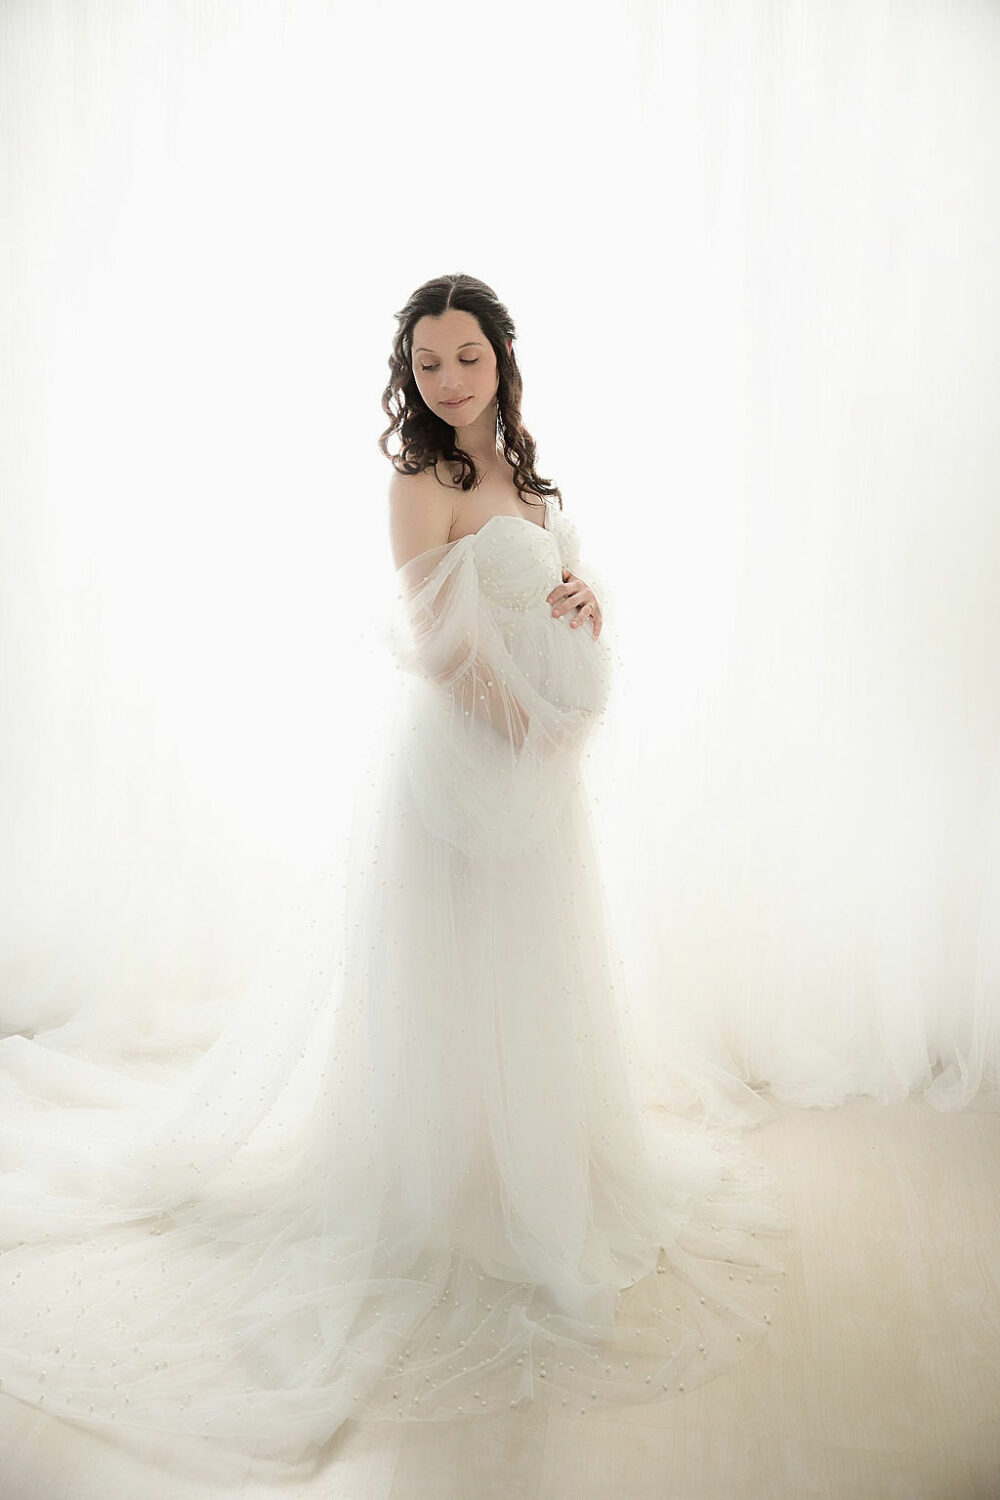 Pregnant woman holding belly and maternity dress for her professional maternity pictures in Toms River, New Jersey.